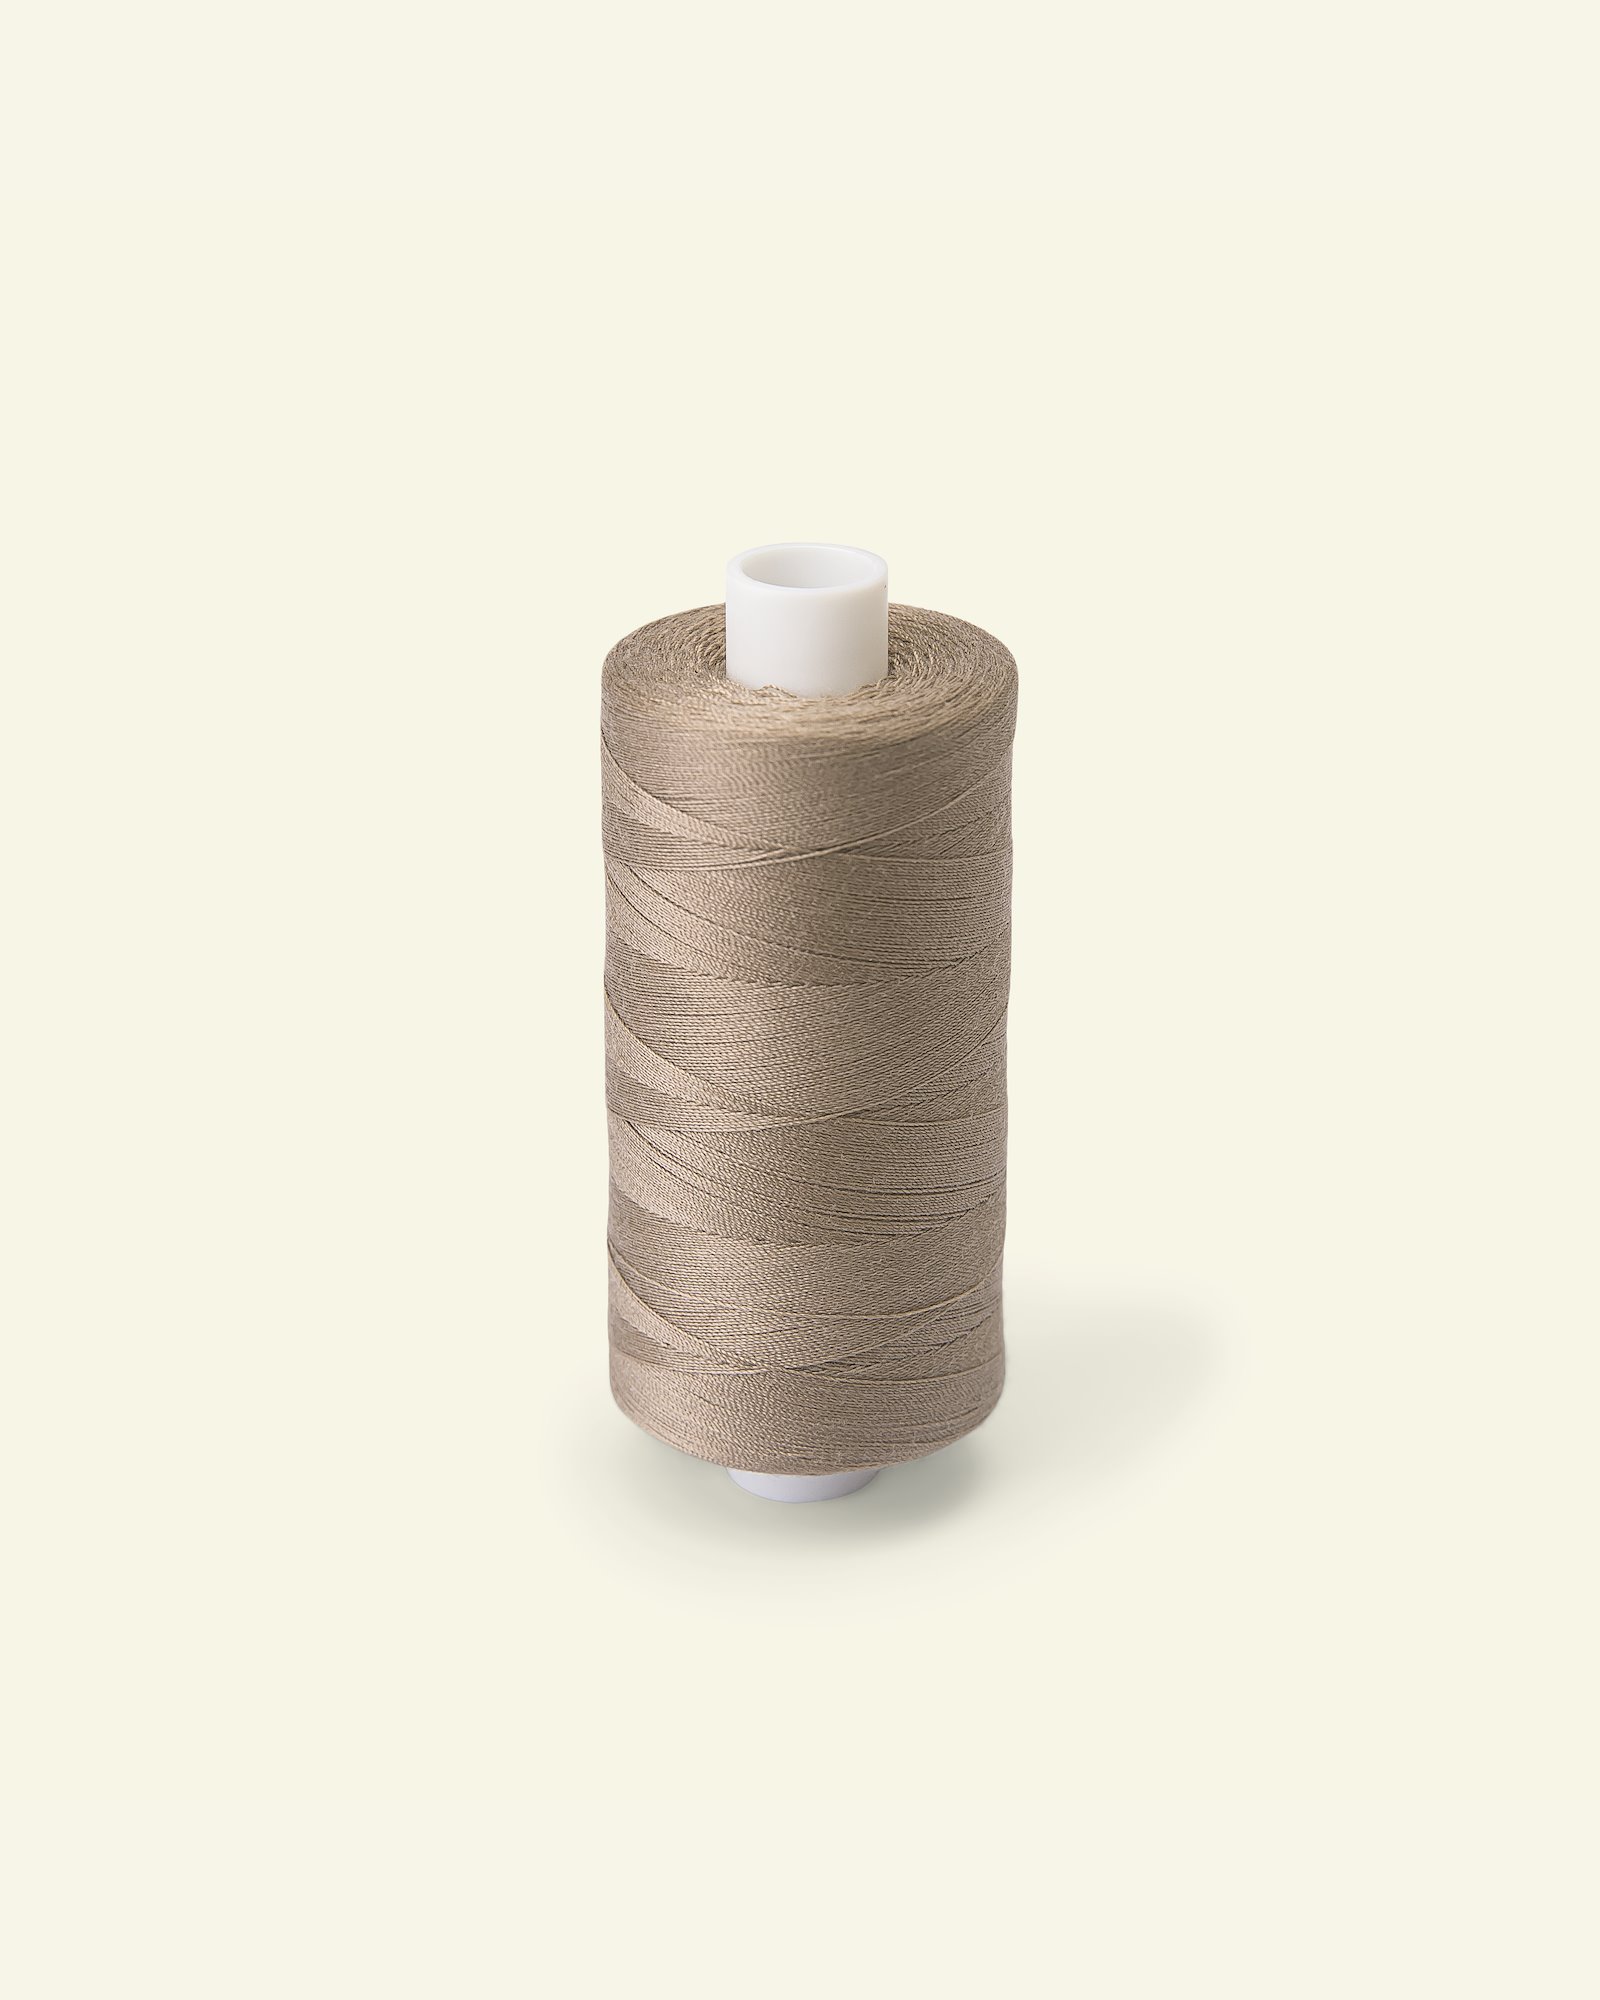 Sewing Threads for Upholstery Fabric, Curtain Making and Crafts